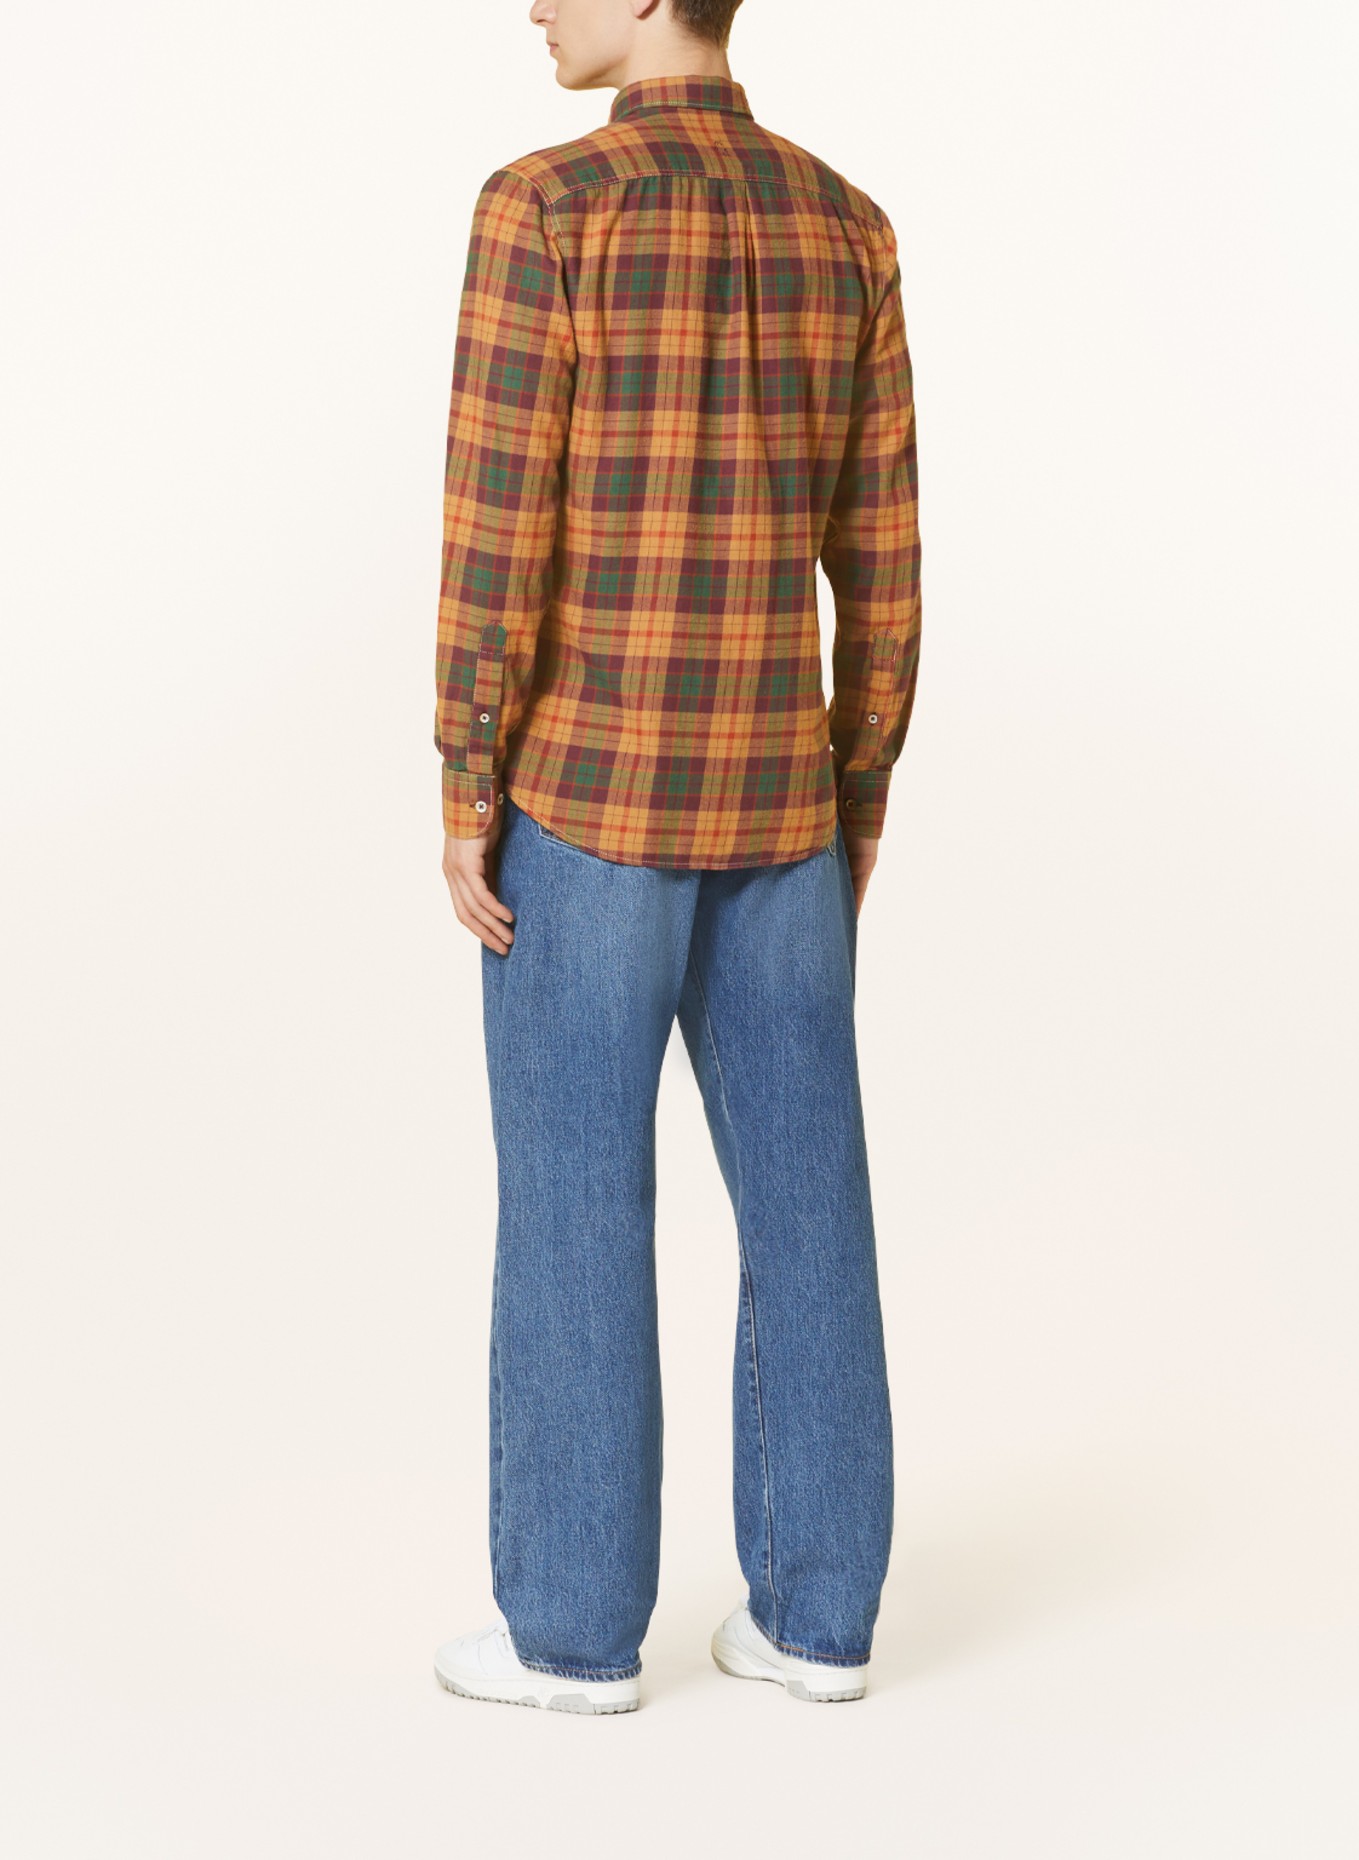 COLOURS & SONS Flannel shirt casual fit, Color: CAMEL/ GREEN/ ORANGE (Image 3)